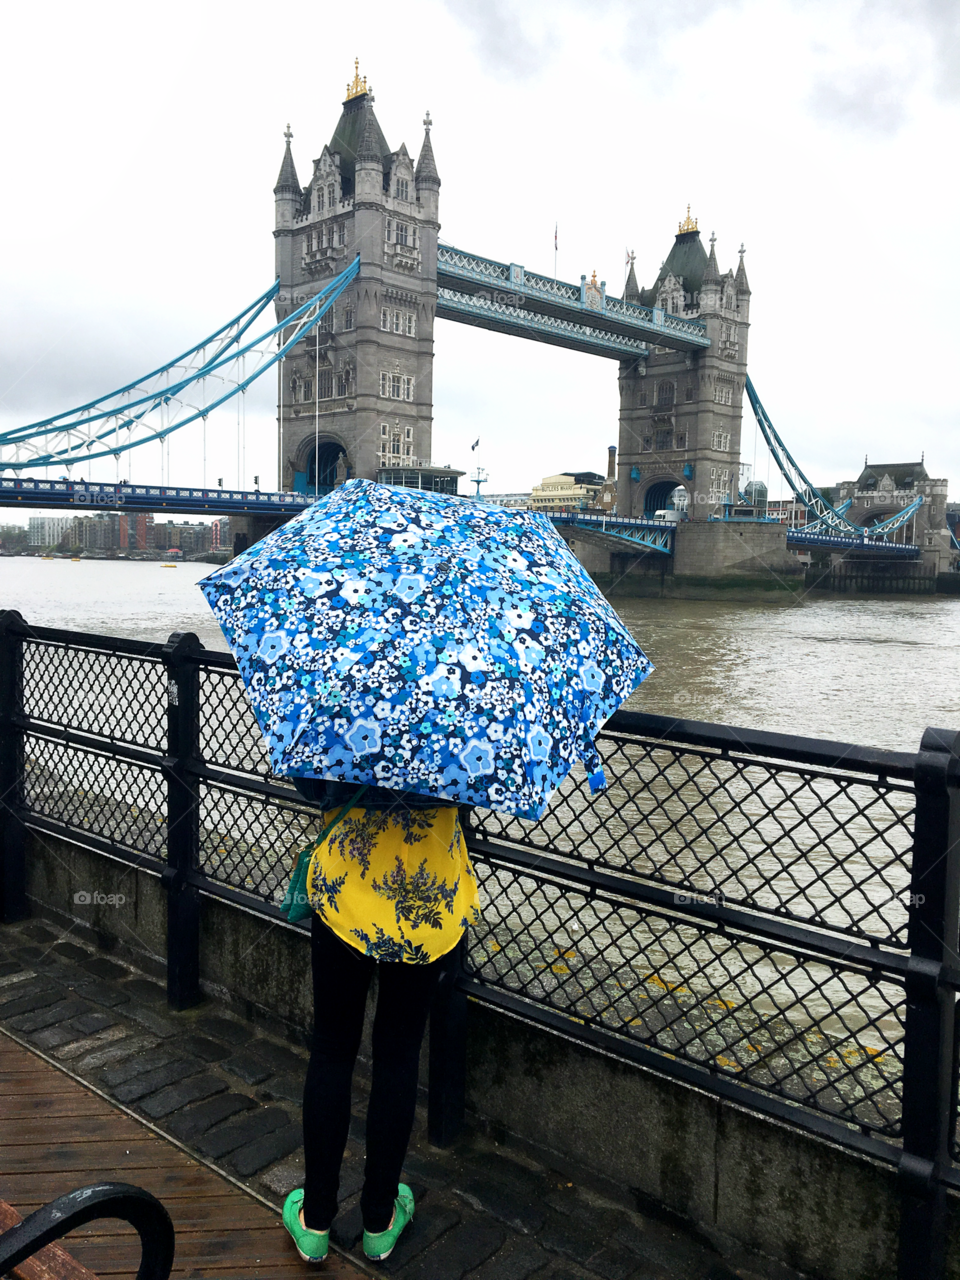 A blue floral umbrella contrasting with a yellow blouse. In front of the Tower of London bridge